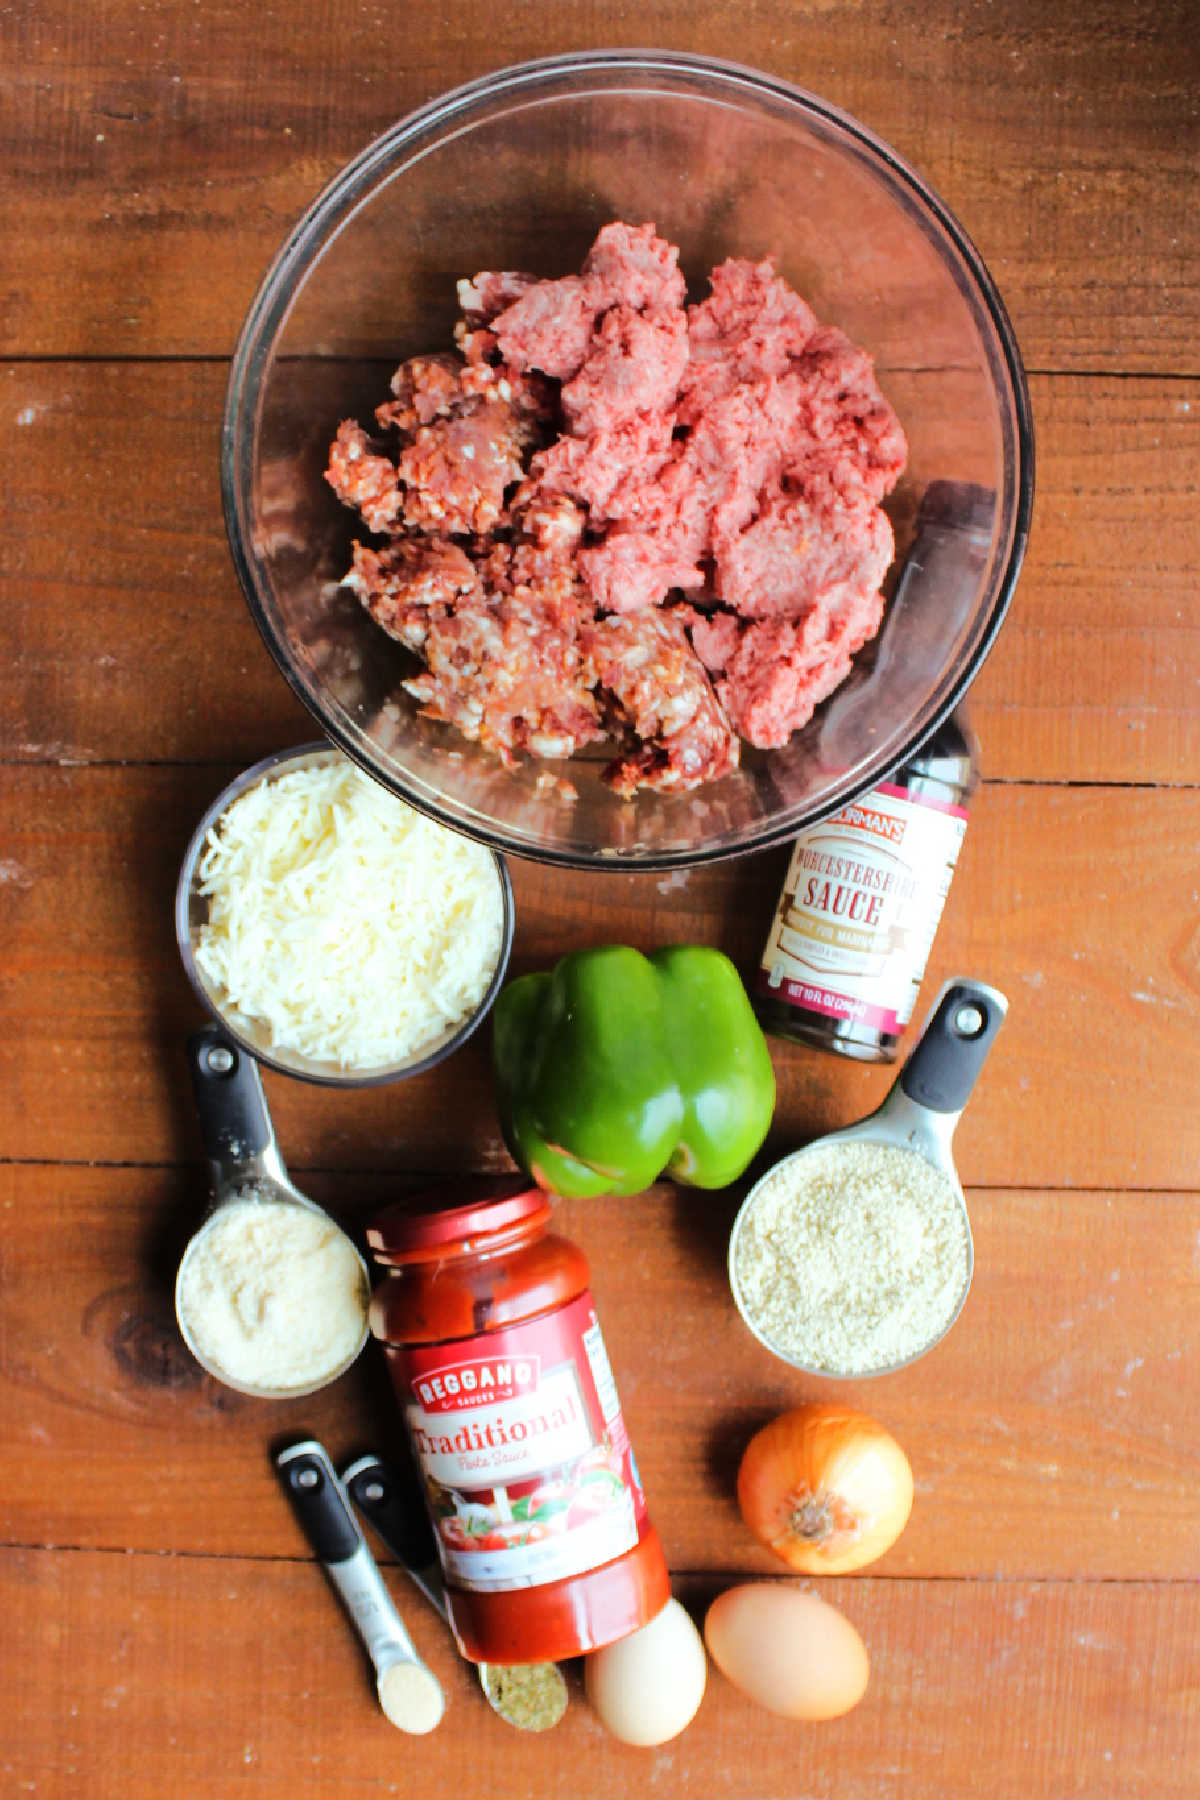 Ingredients including ground beef, Italian sausage, bell pepper, onion, eggs, bread crumbs, marinara sauce and Worcestershire sauce ready to be made into Italian meatloaf.